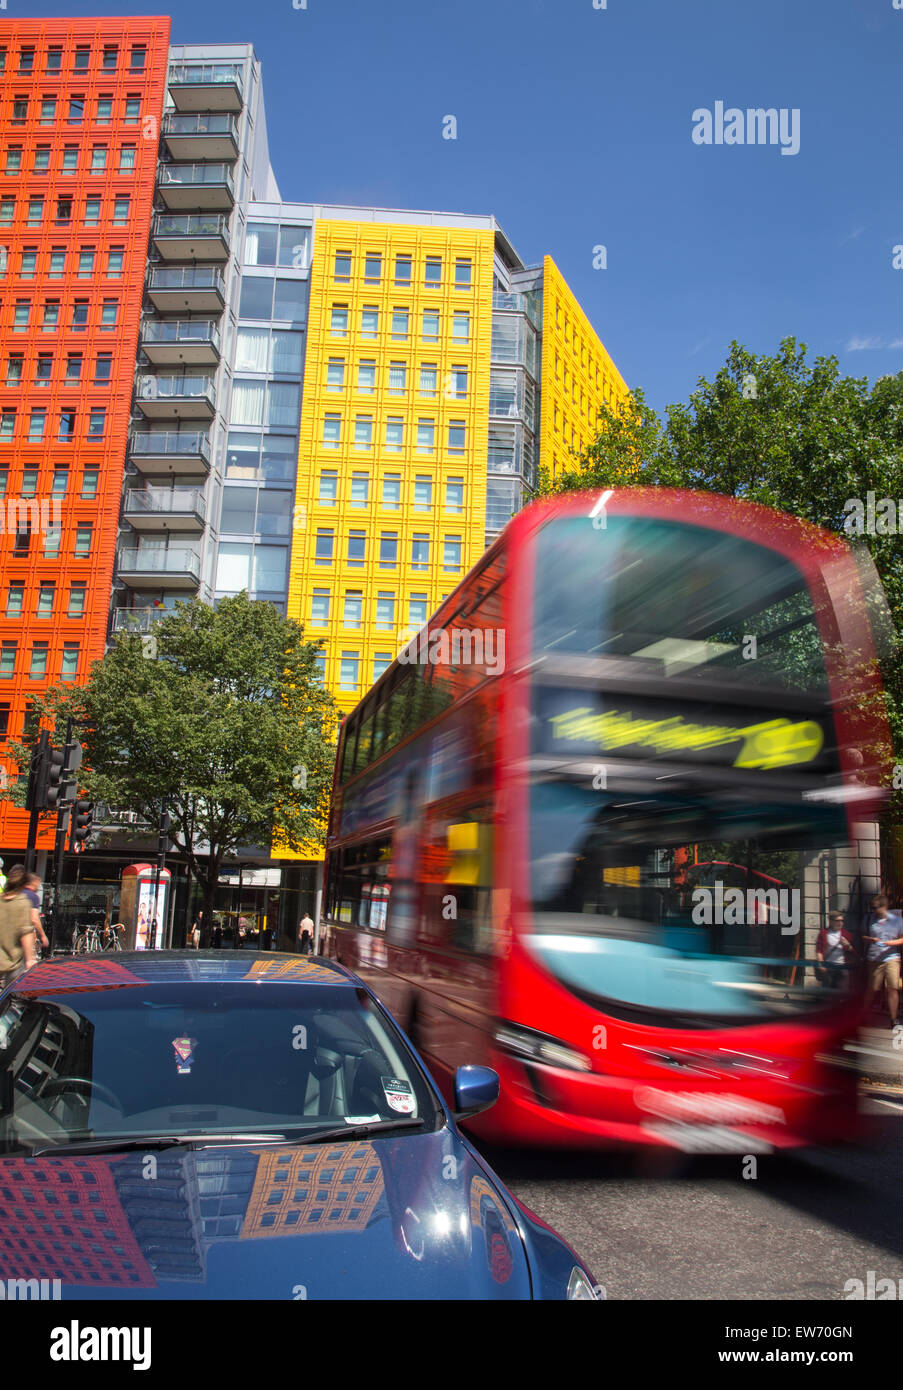 Red London double decker bus passing by brightly colored office blocks Stock Photo